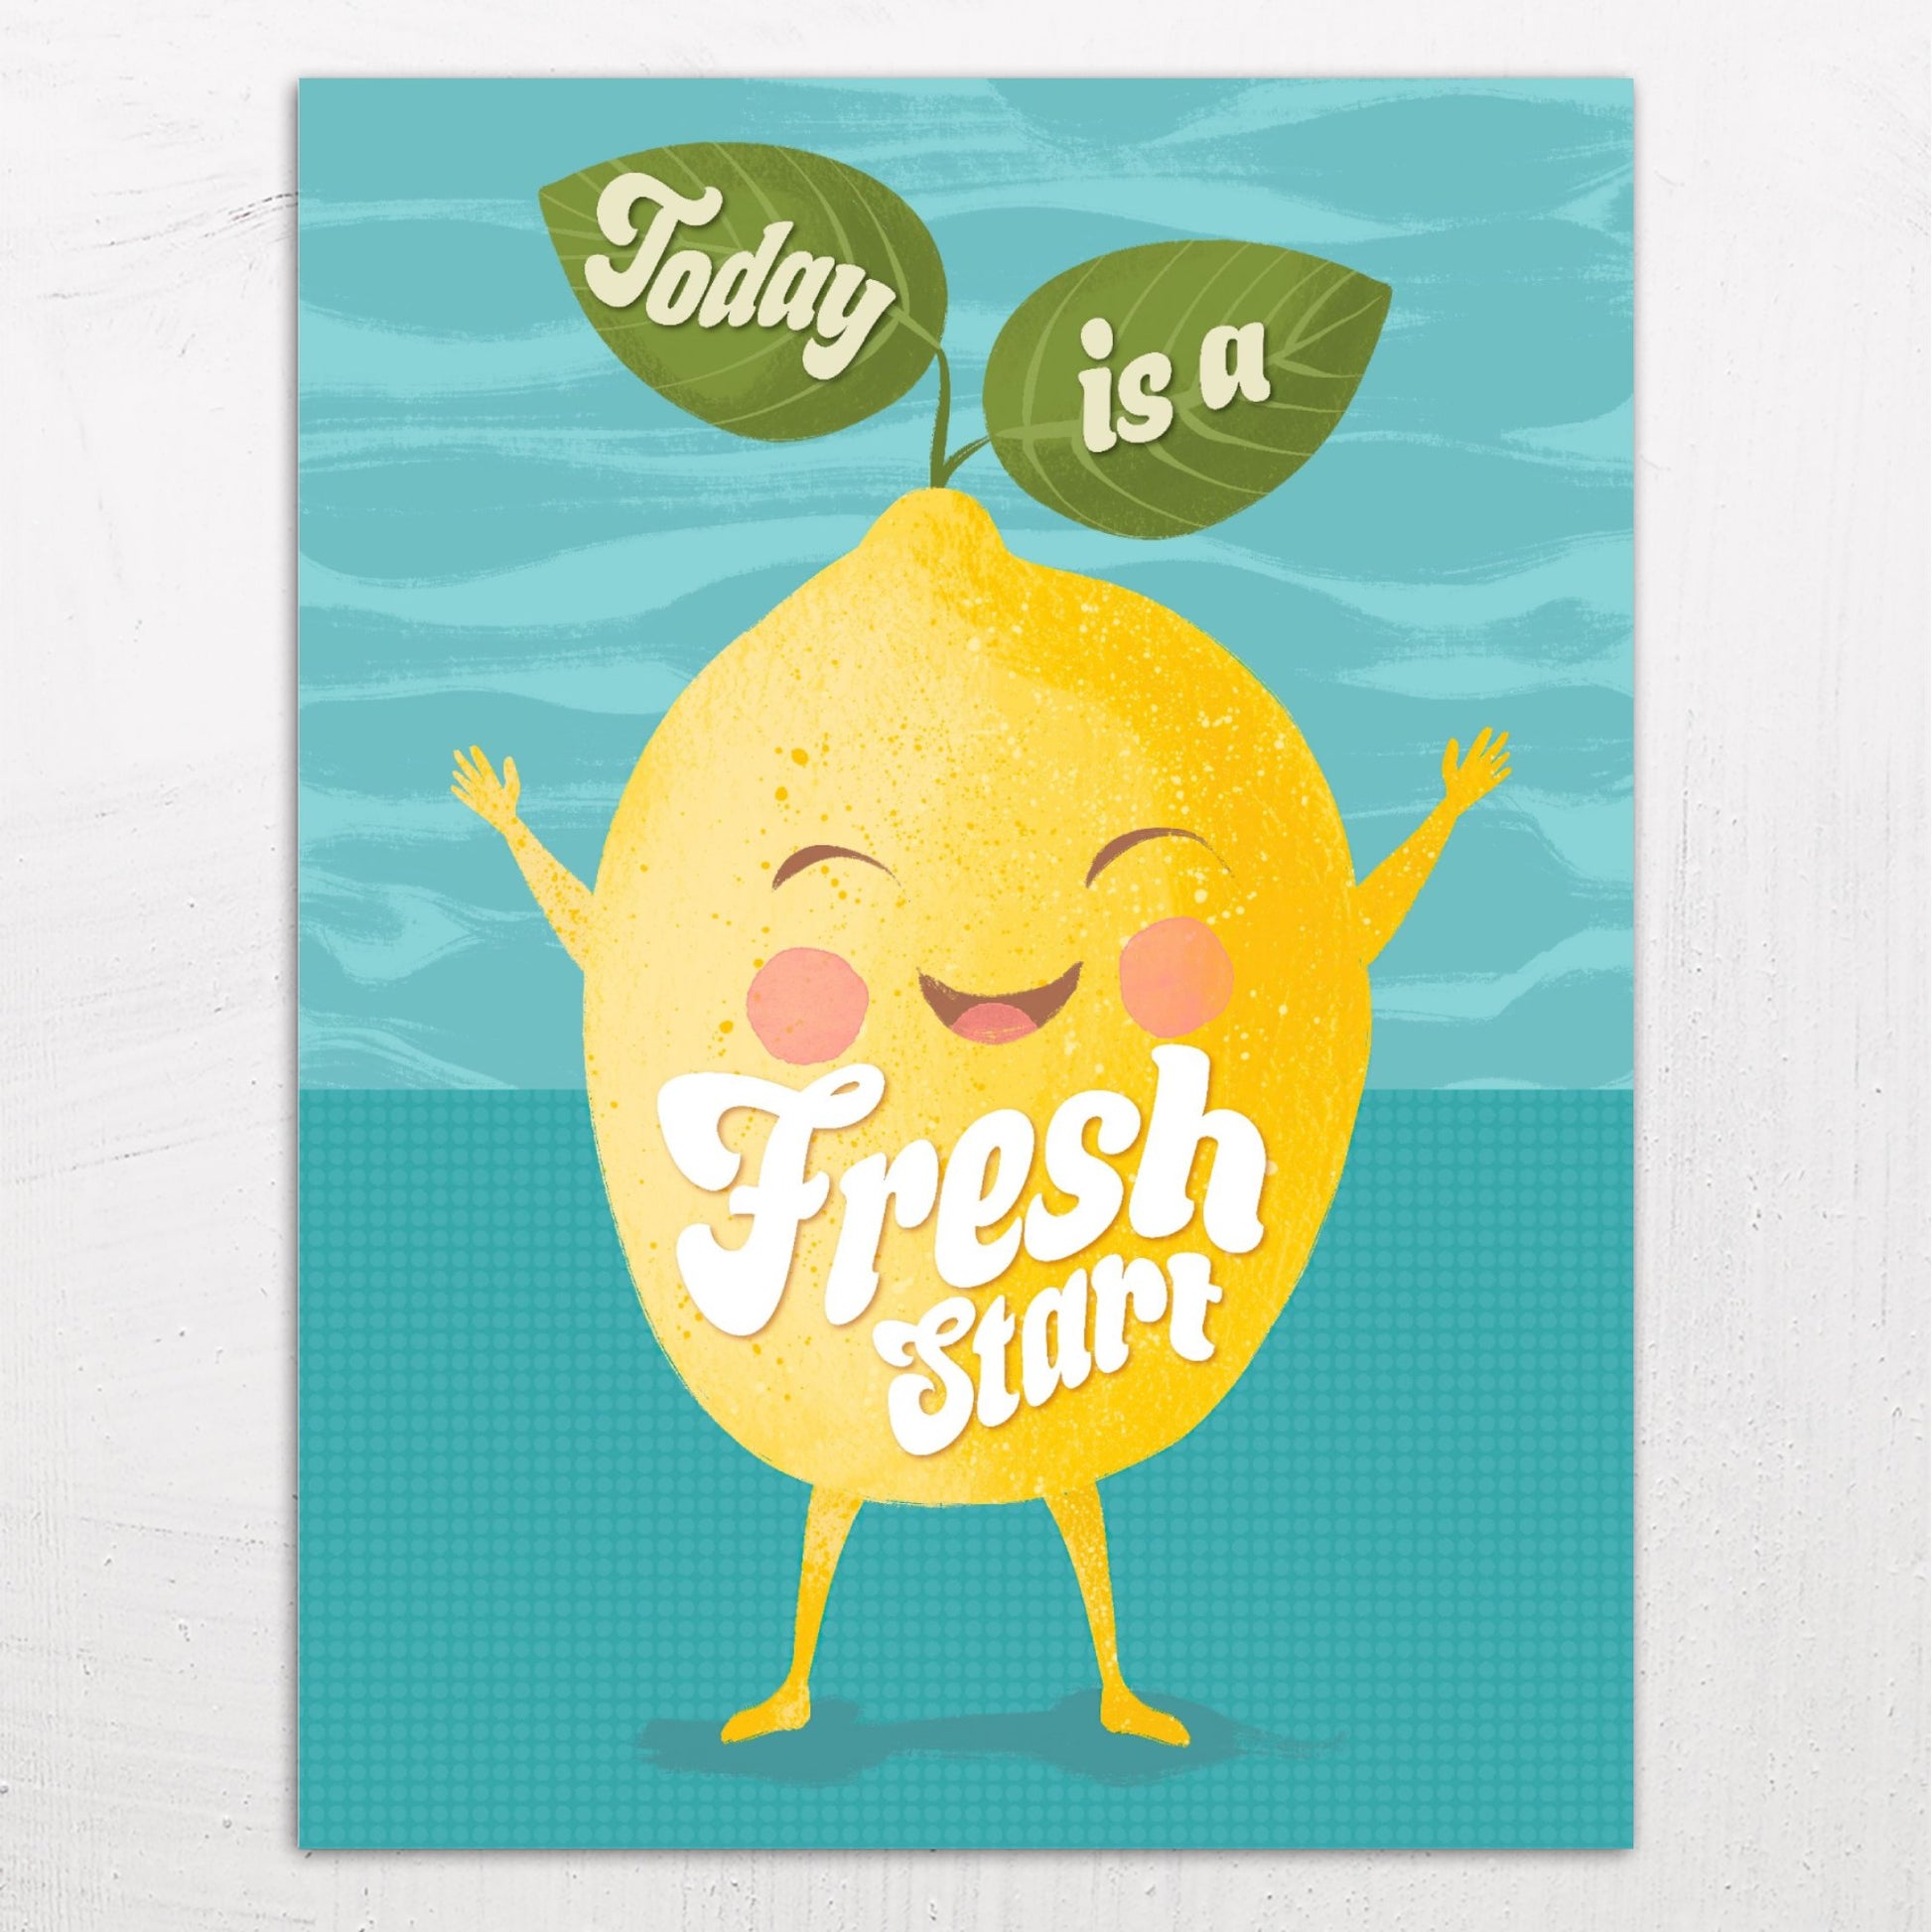 A large size metal art poster display plate with printed design of a Cute Lemon Quote 'Today is a Fresh Start'